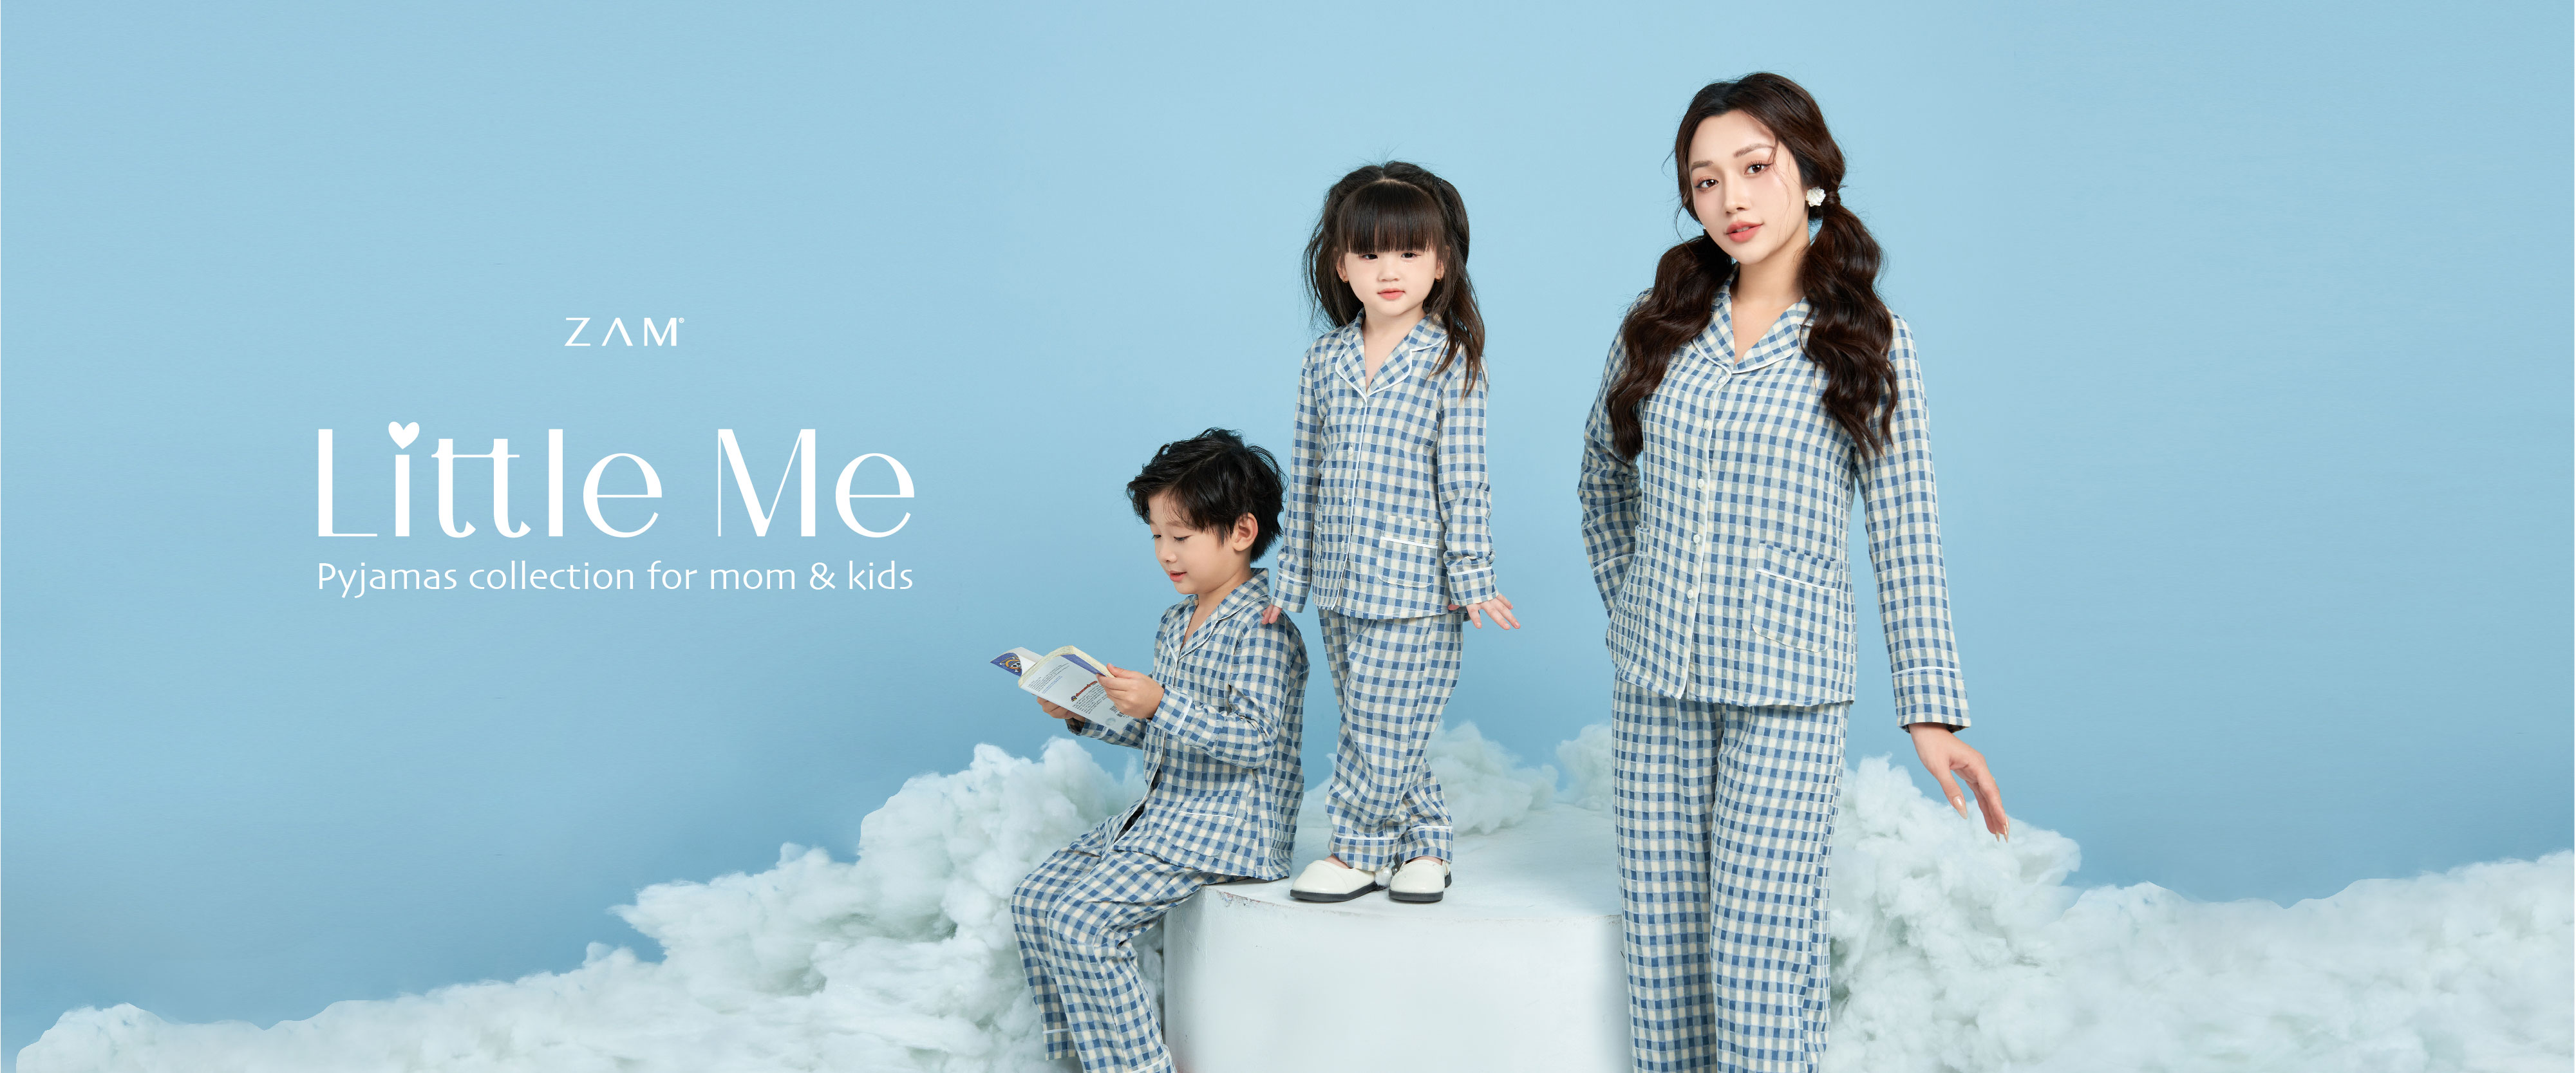 LITTLE ME || MOM & KID HOMEWEAR COLLECTION